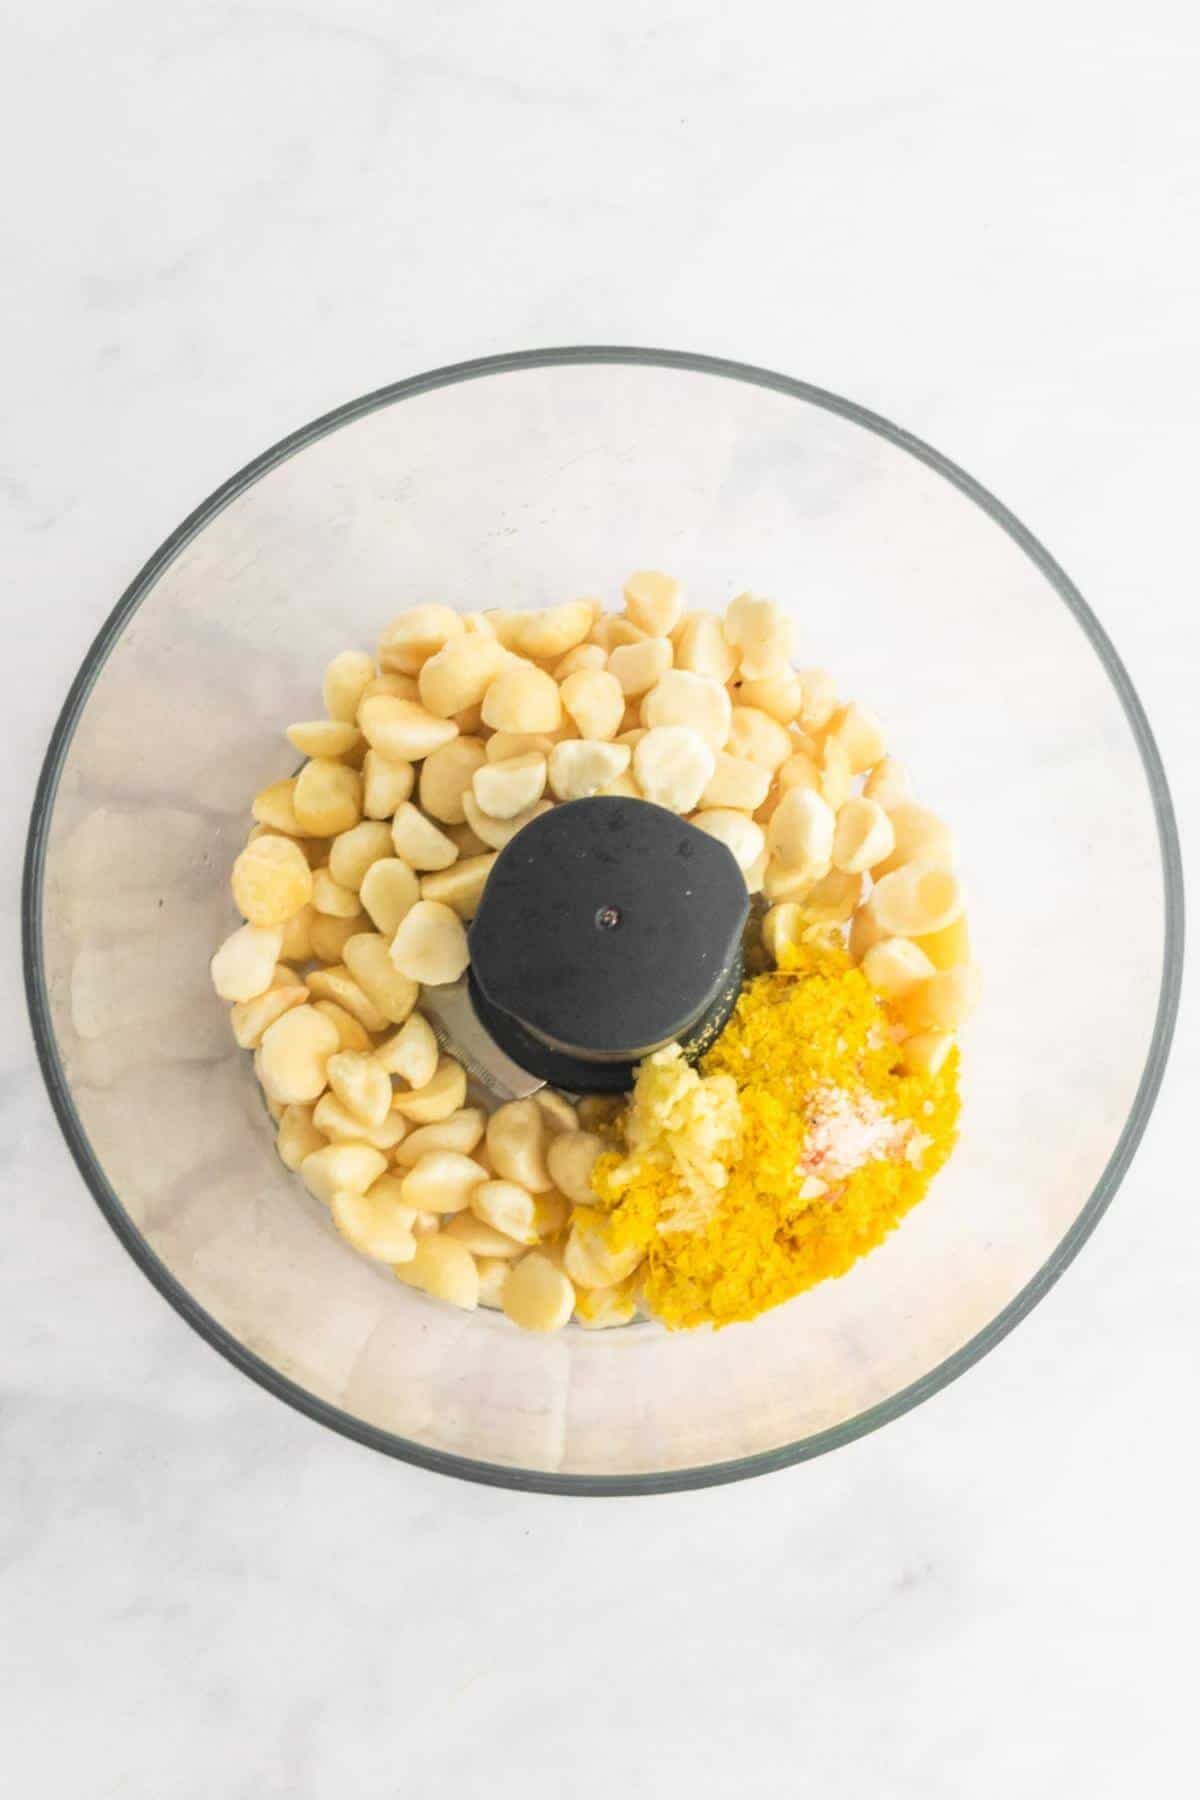 Macadamia cheese recipe ingredients added to a food processor.